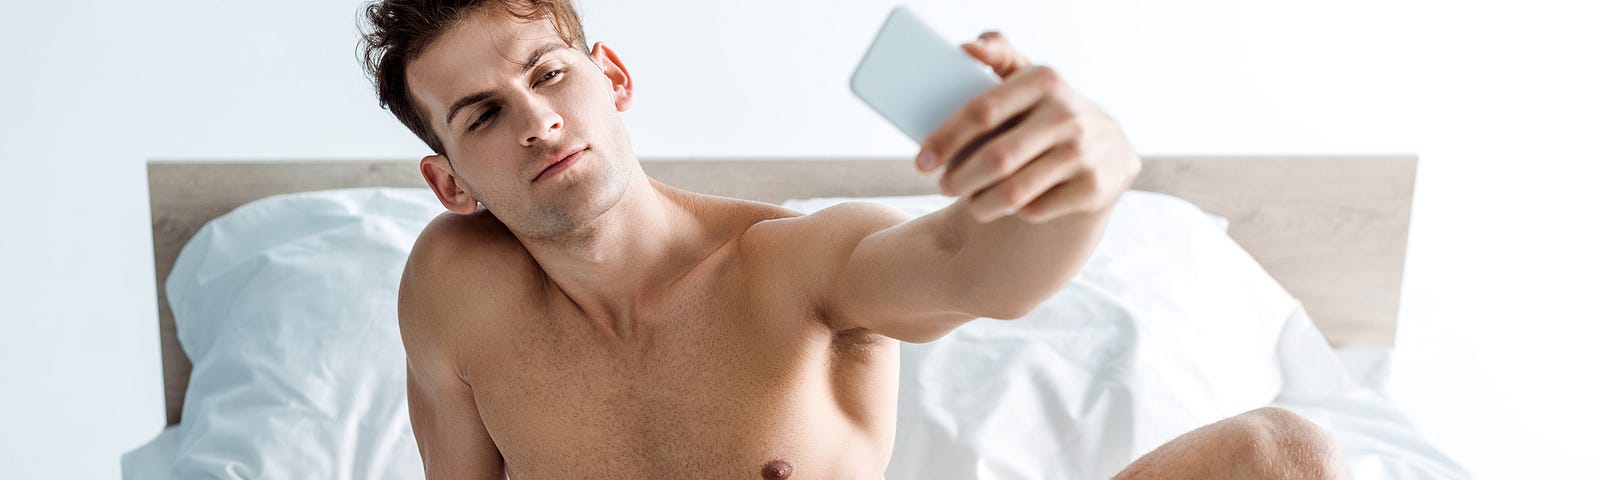 A shirtless man in his underwear taking a photo to sext with someone